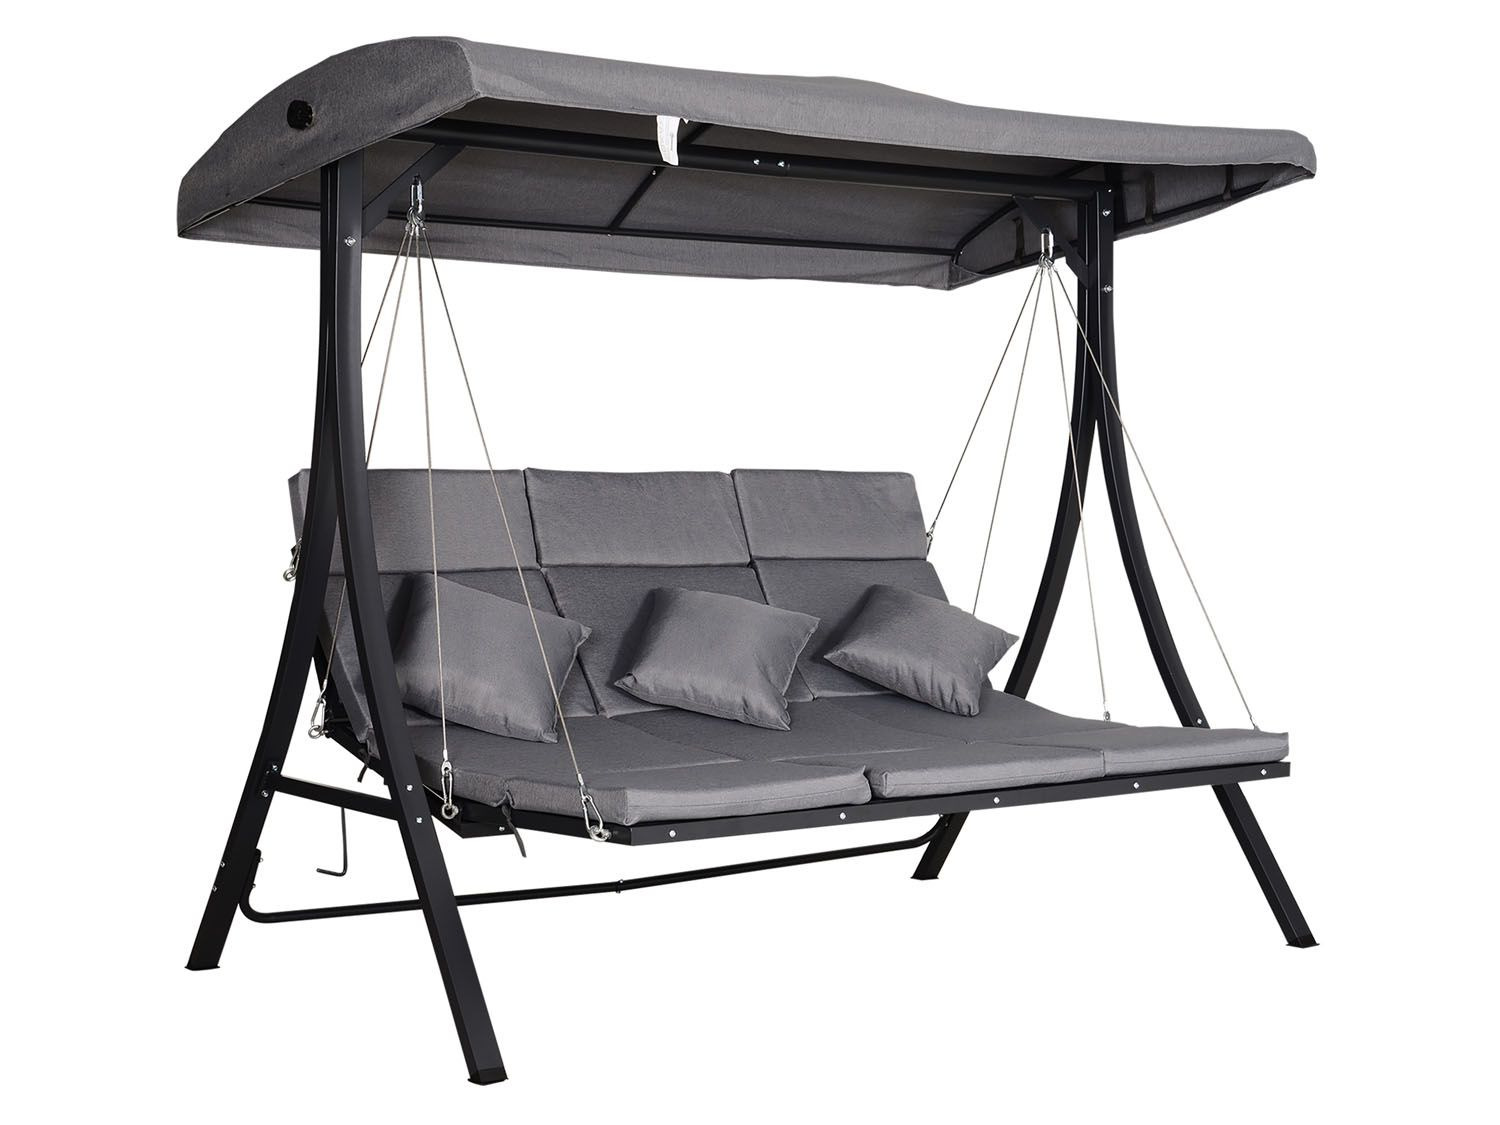 Hollywoodschaukel LIDL Outsunny Lounge, 3-Sitzer |